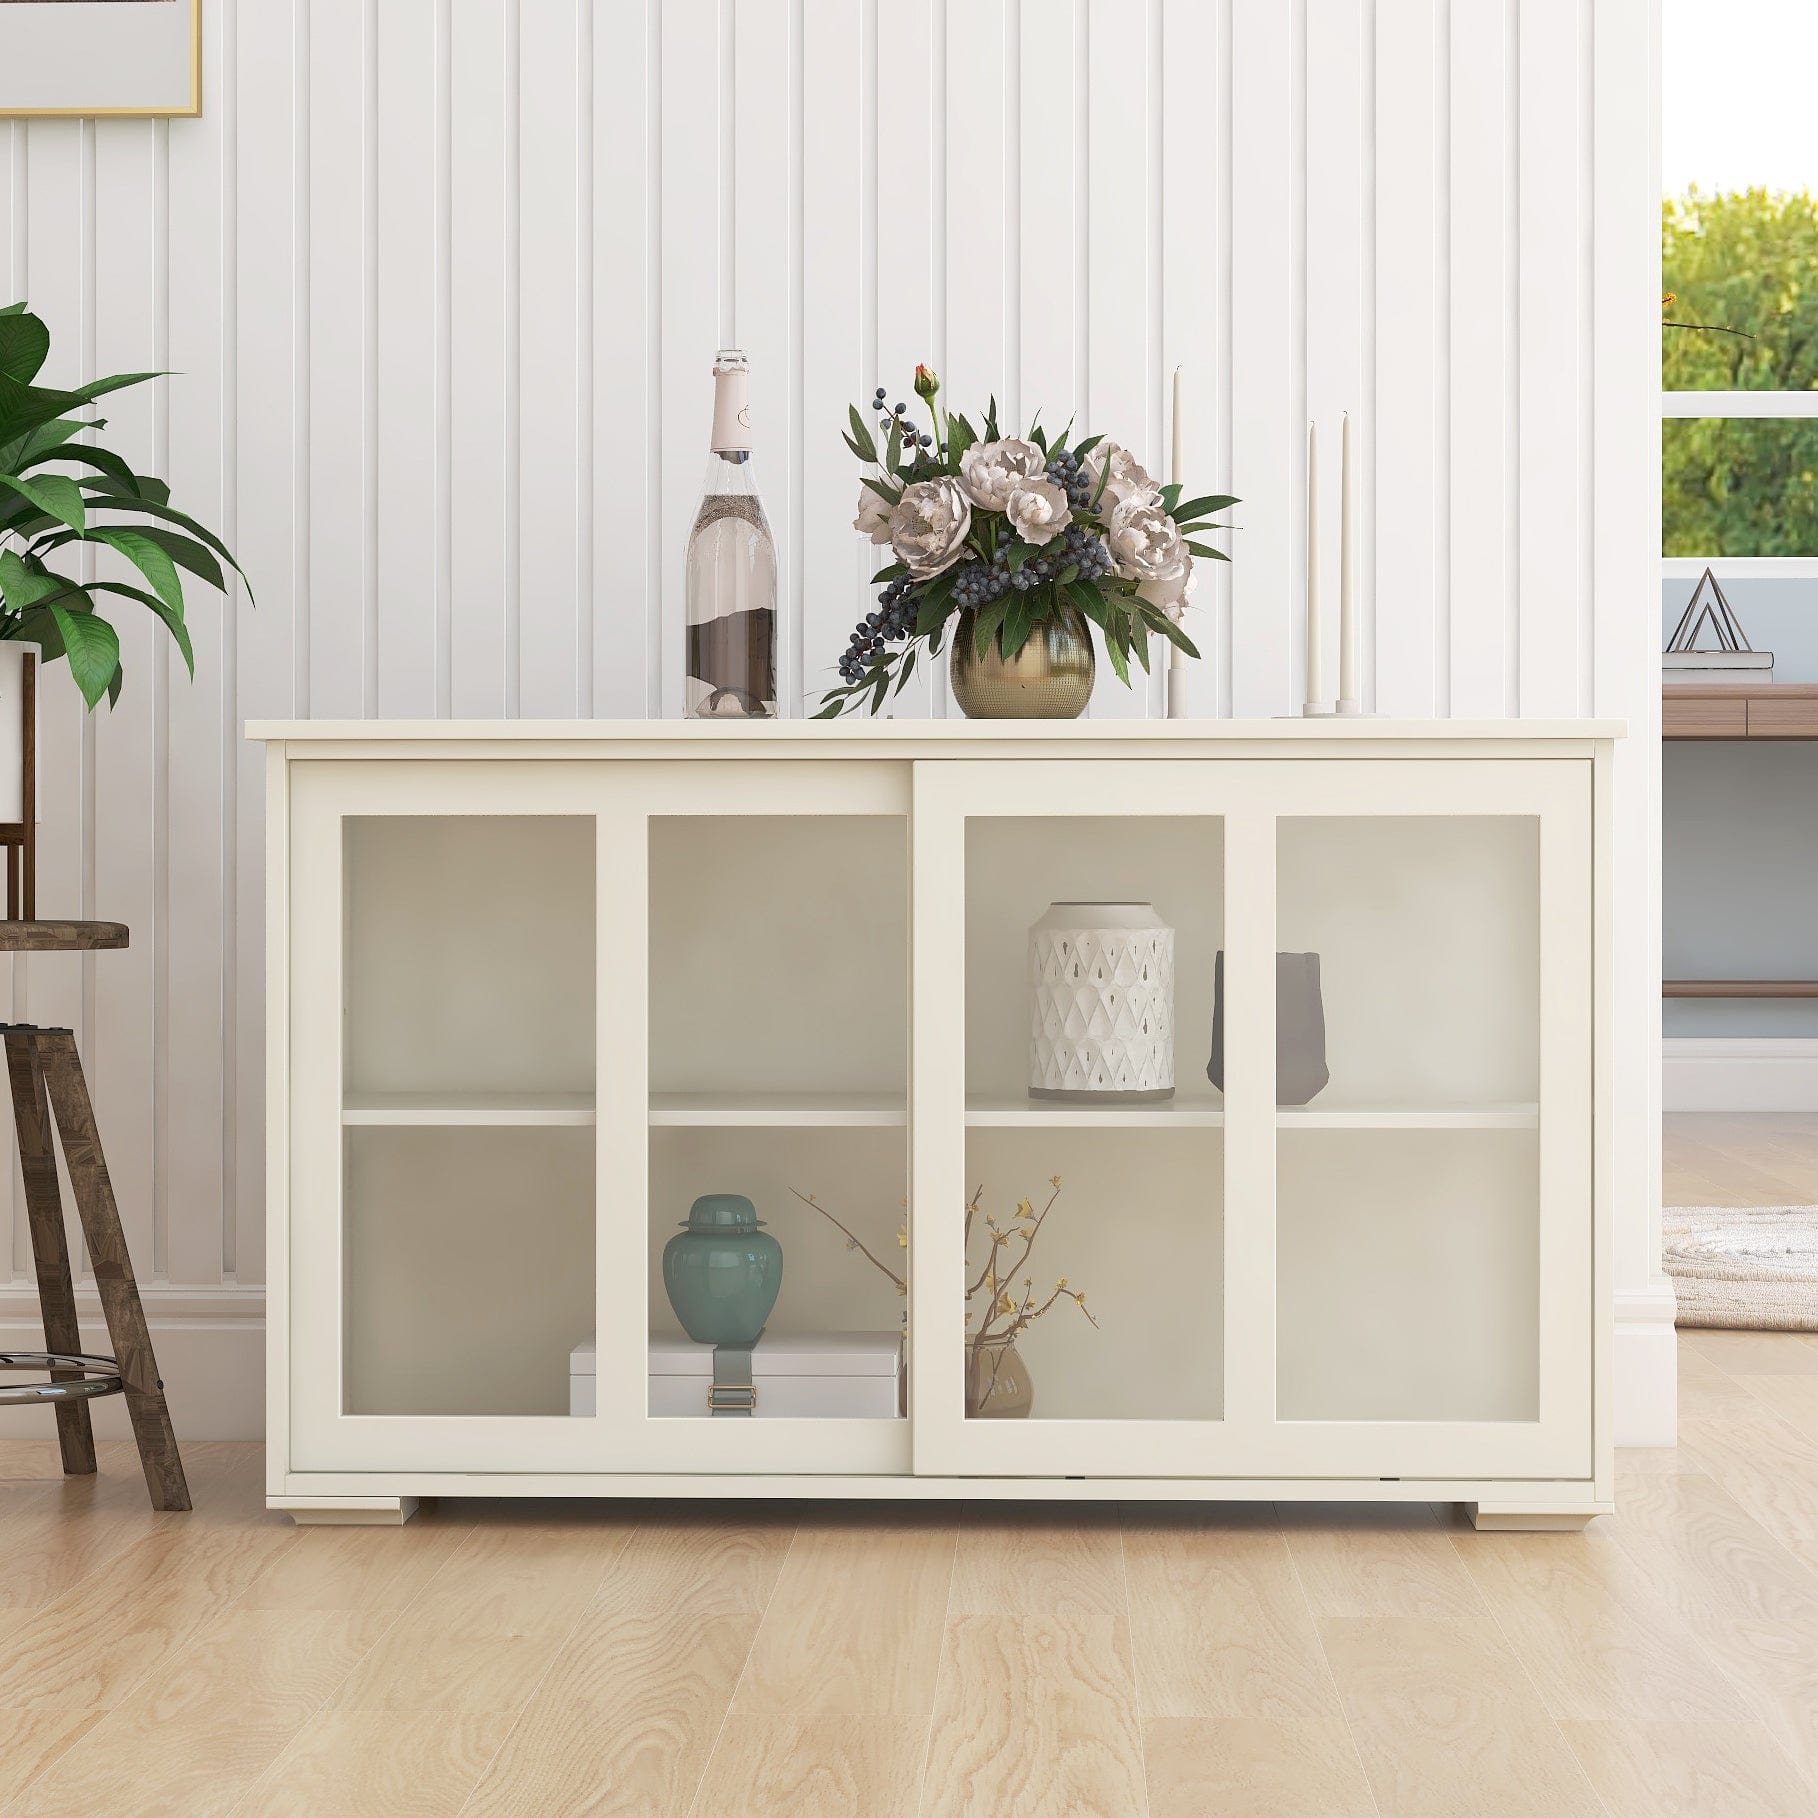 1st Choice Furniture Direct Cupboard 1st Choice White Kitchen Stand Cupboard with Glass Door